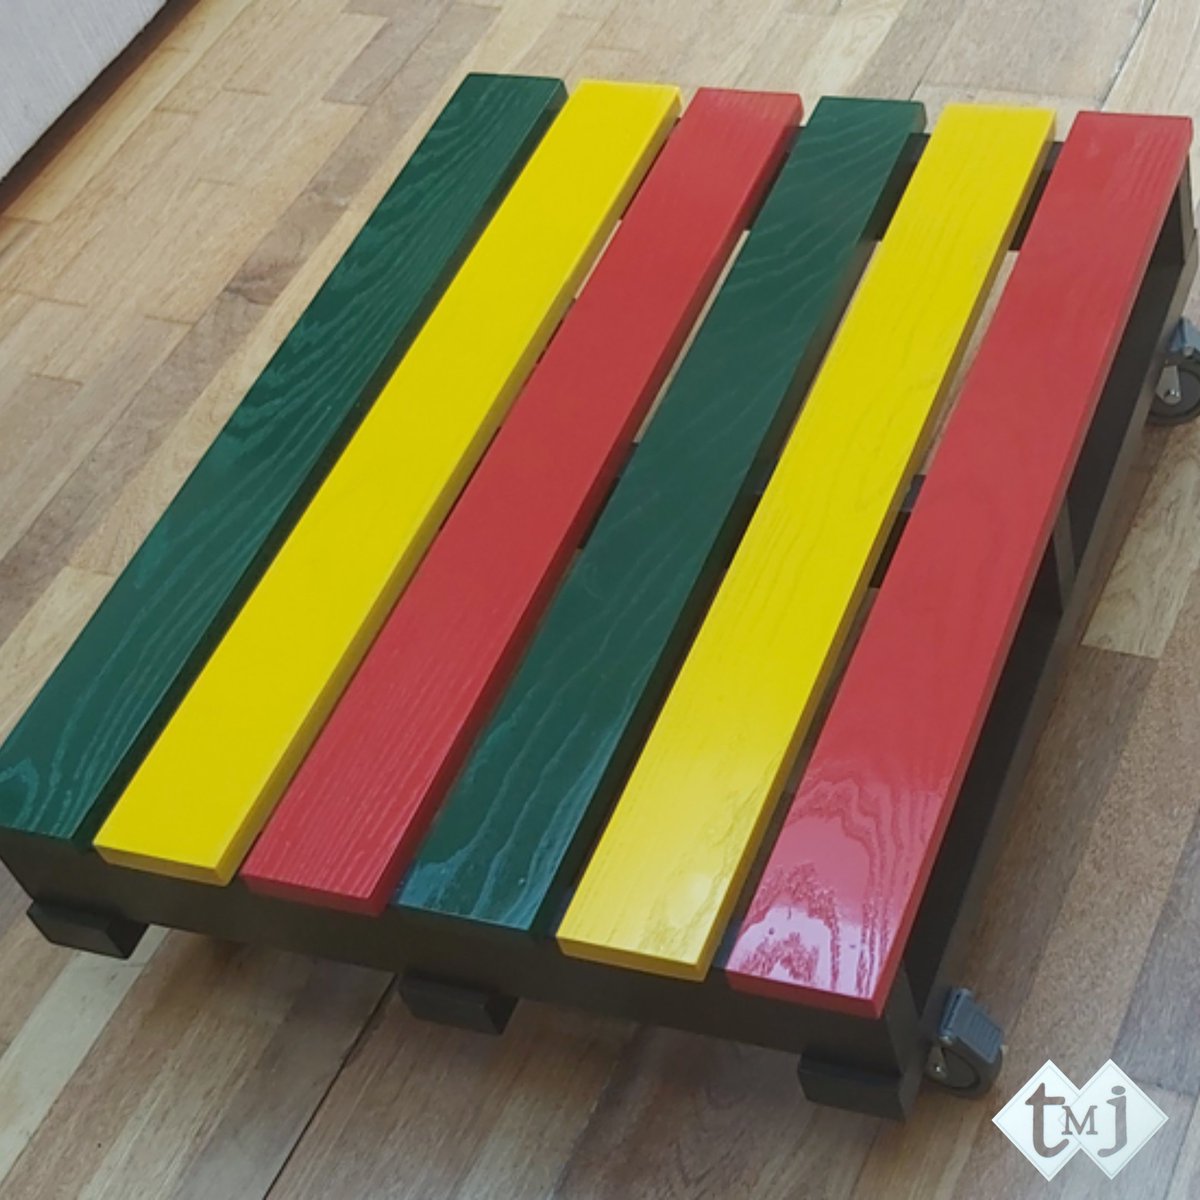 This unique table, featuring a pallet-inspired structure, rolls in style with wheels for added convenience. Coloured in bold red, yellow, and green hues, it brings lively and dynamic energy to your space.

#TMJDesigns #interiordesignersnearme #HomeDecor #designerfurnitures